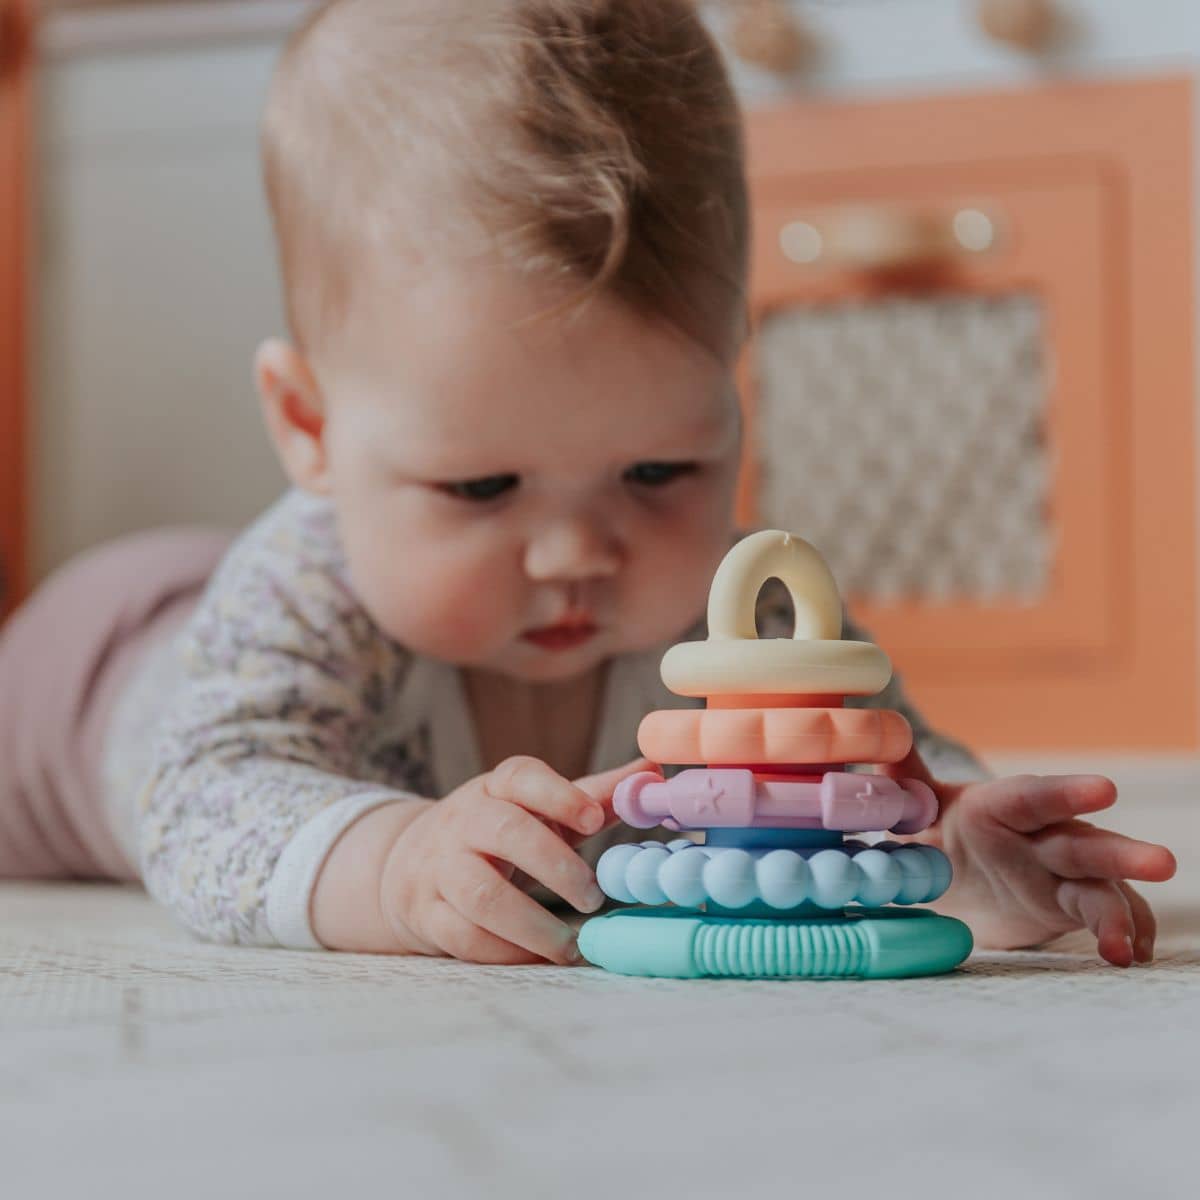 Jellystone Designs Rainbow Stacker Teether and Toy - Pastel